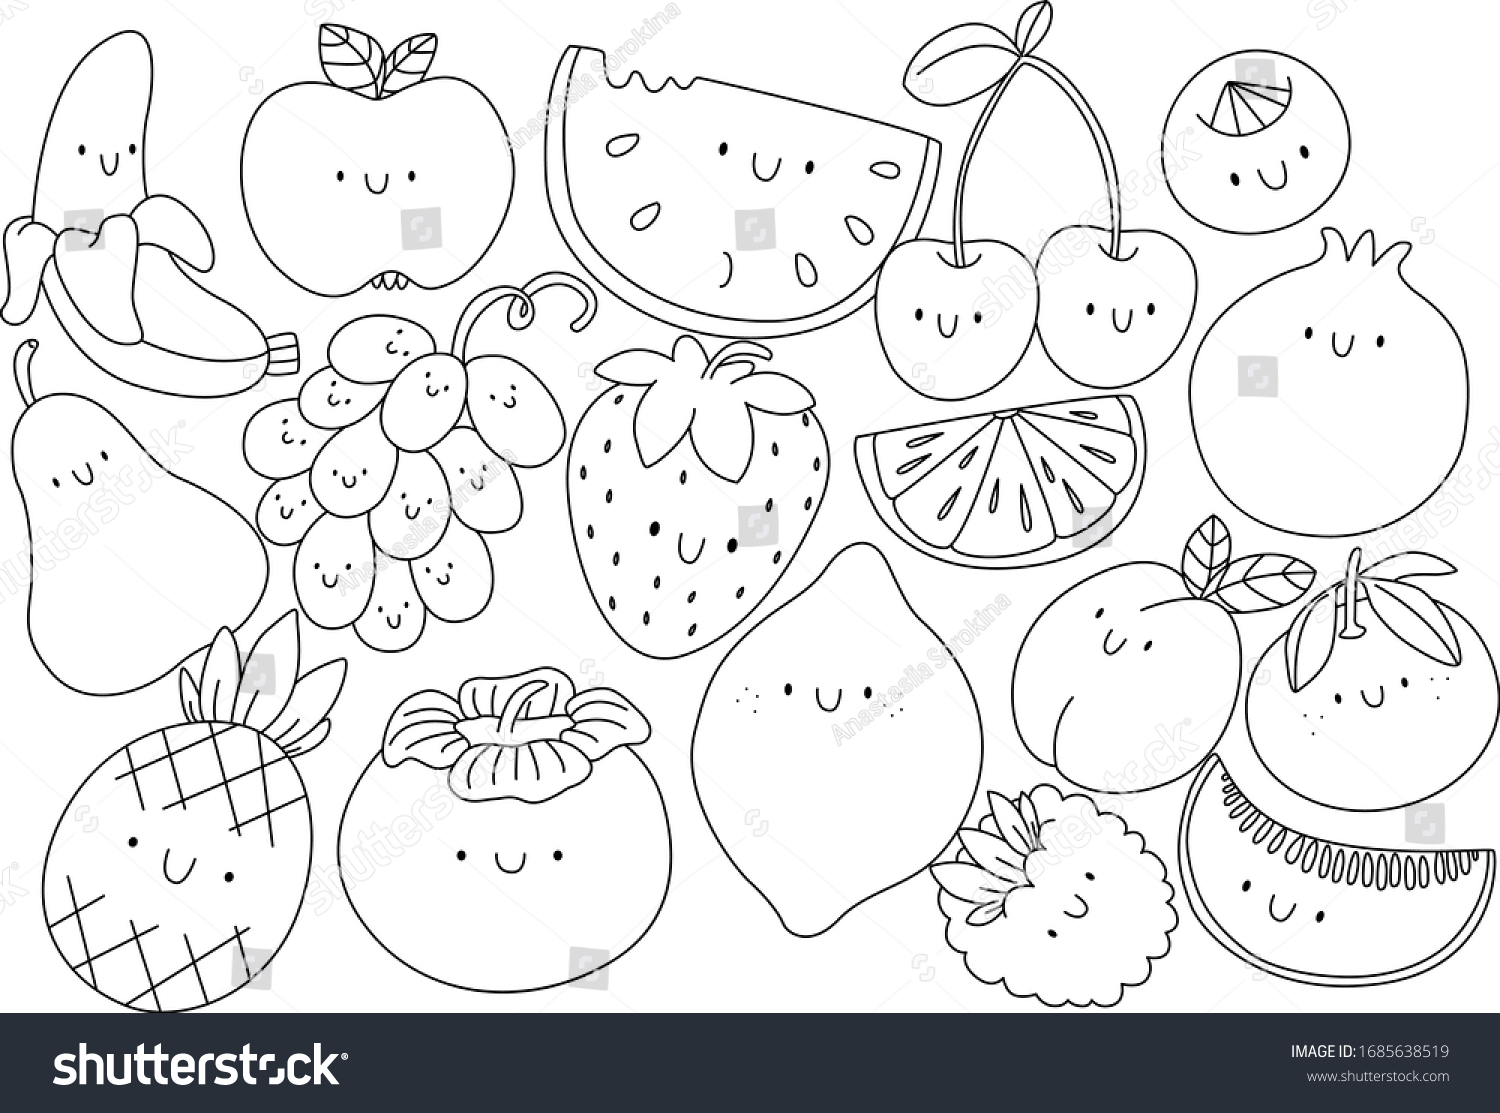 Thousand coloring book fruit royalty